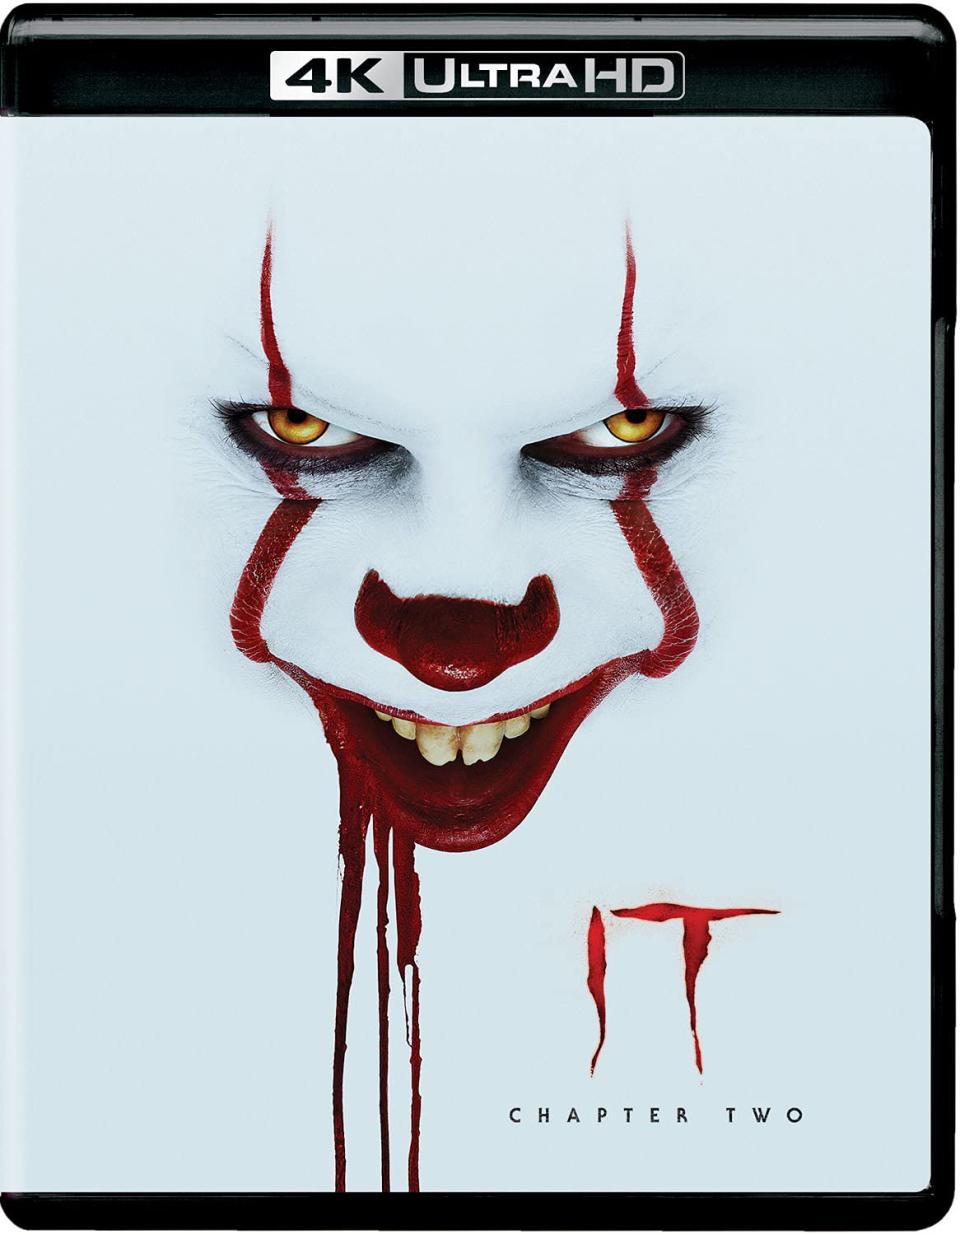 clown on dvd cover